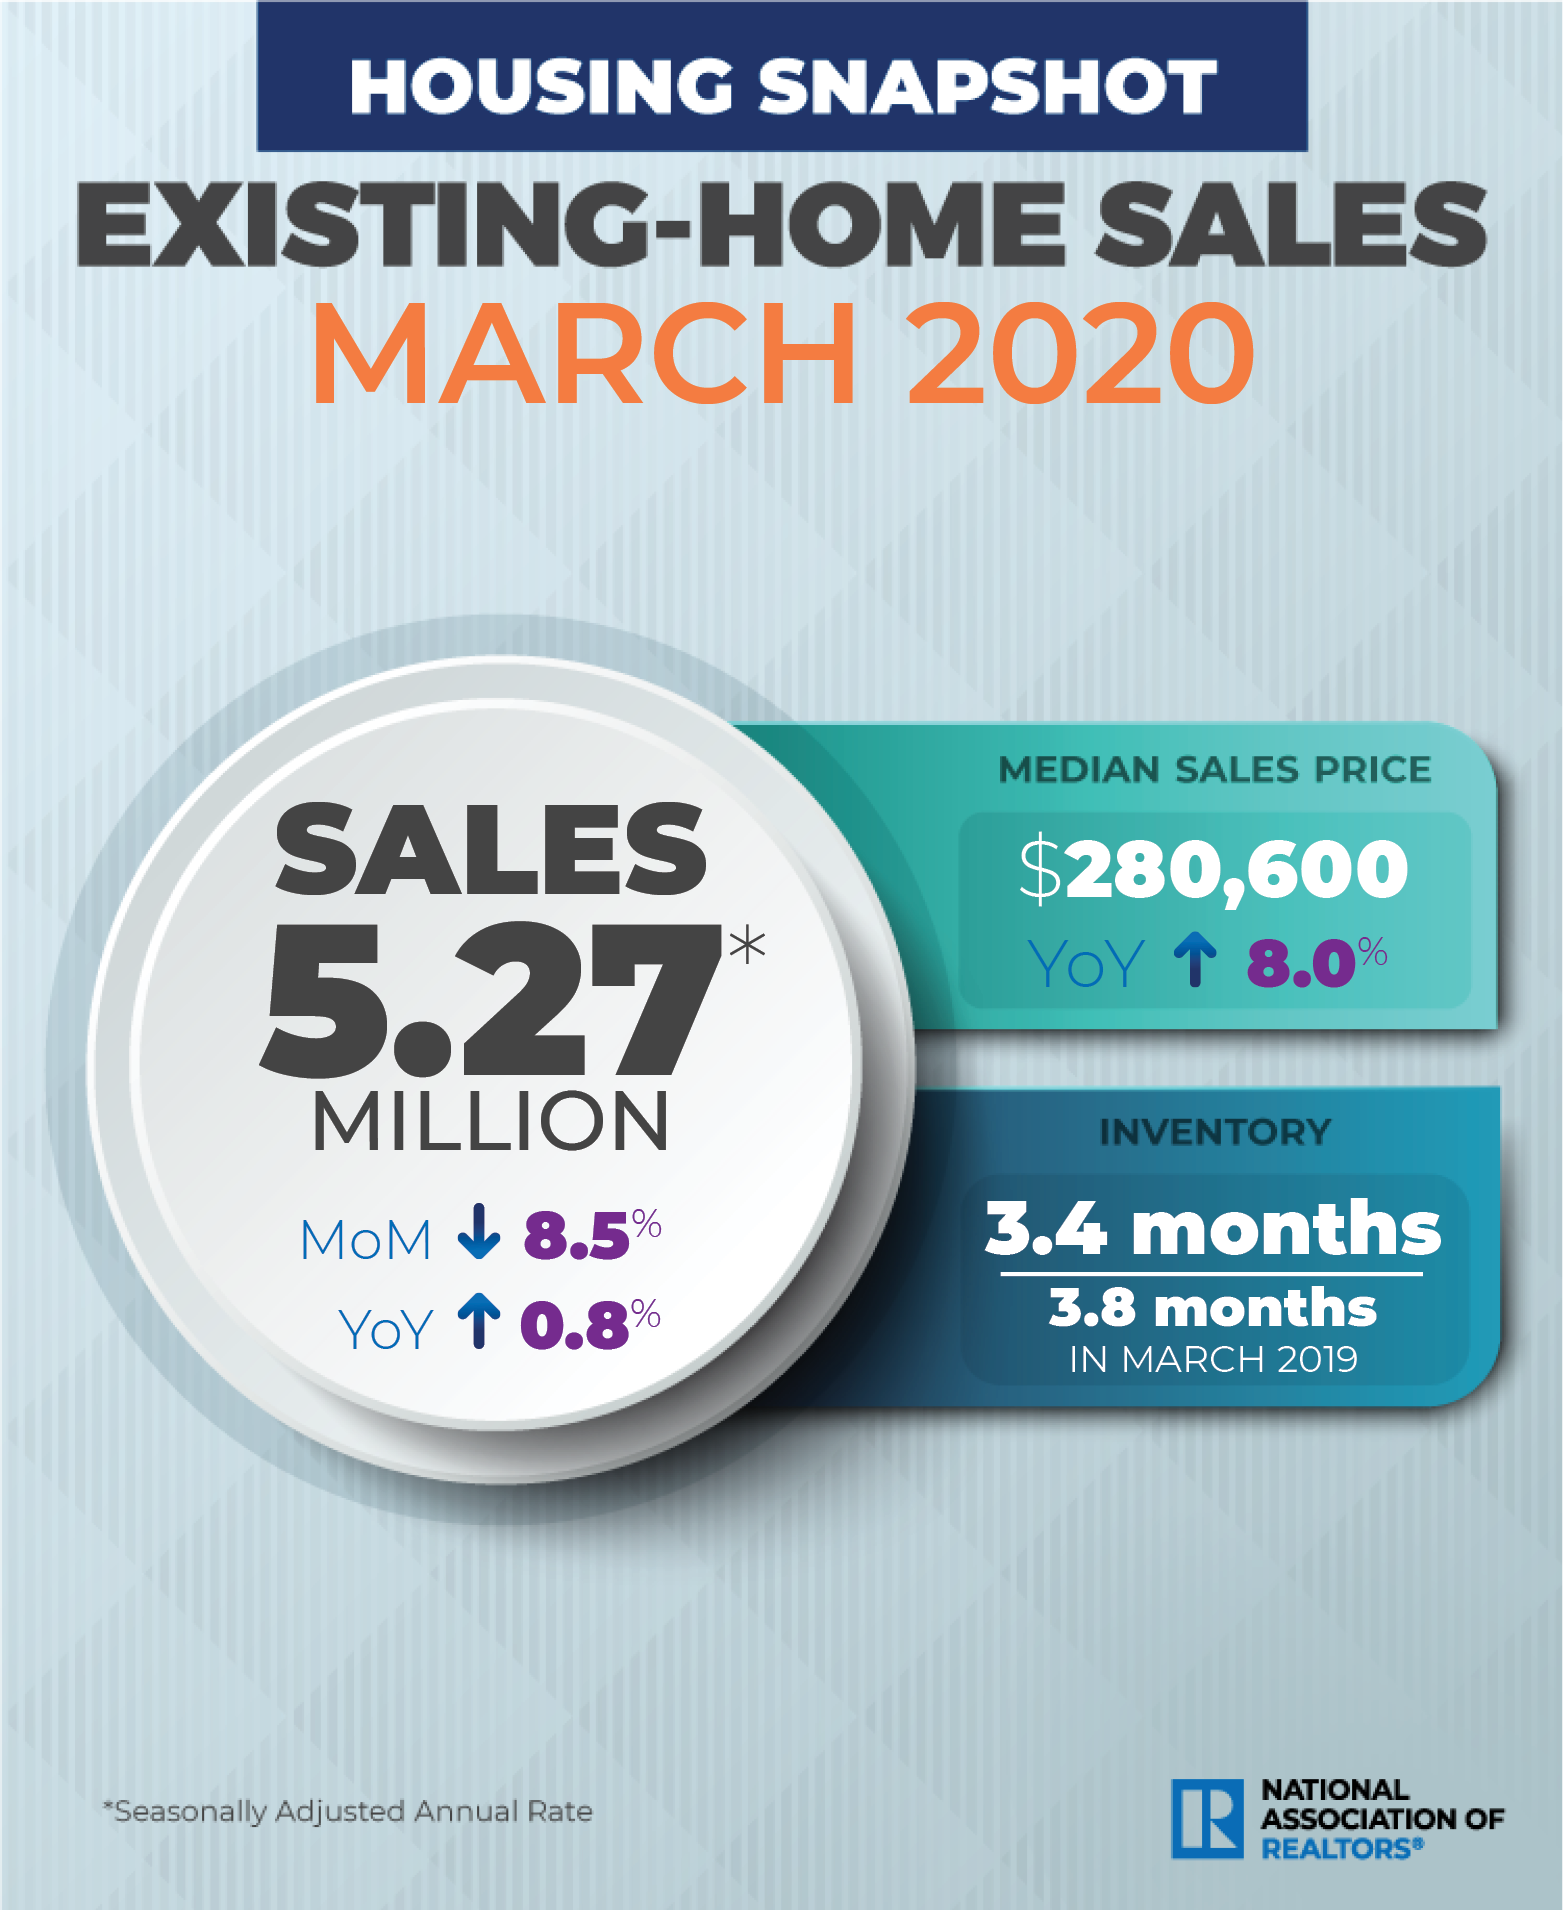 Existing-home sales fell in March, following a February that saw significant nationwide gains, according to the National Association of Realtors (NAR)